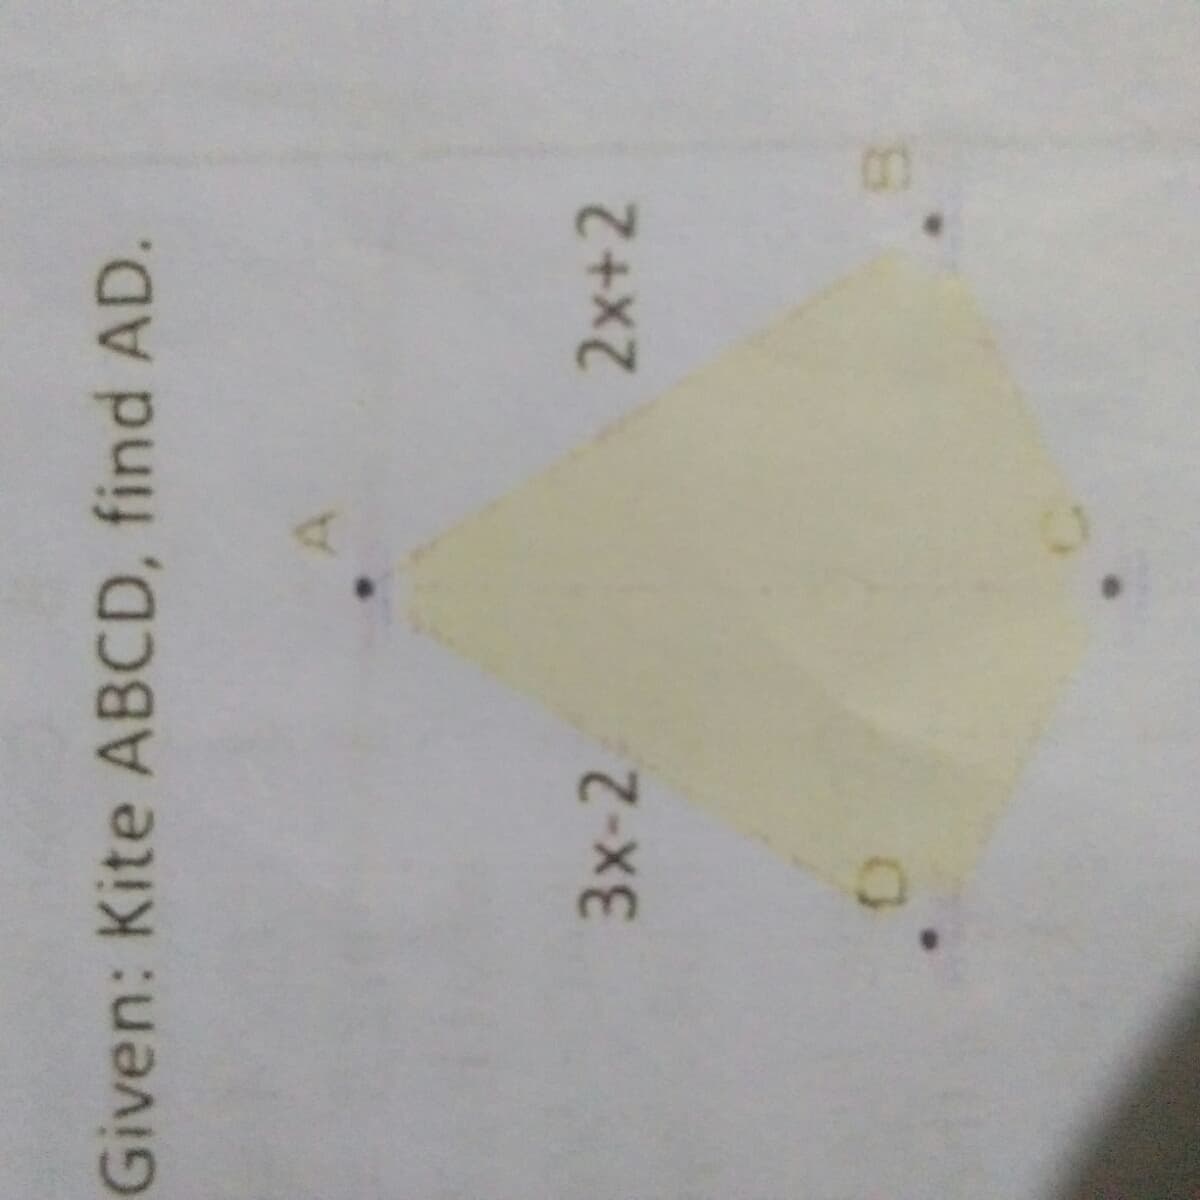 Given: Kite ABCD, find AD.
3x-2
2x+2
